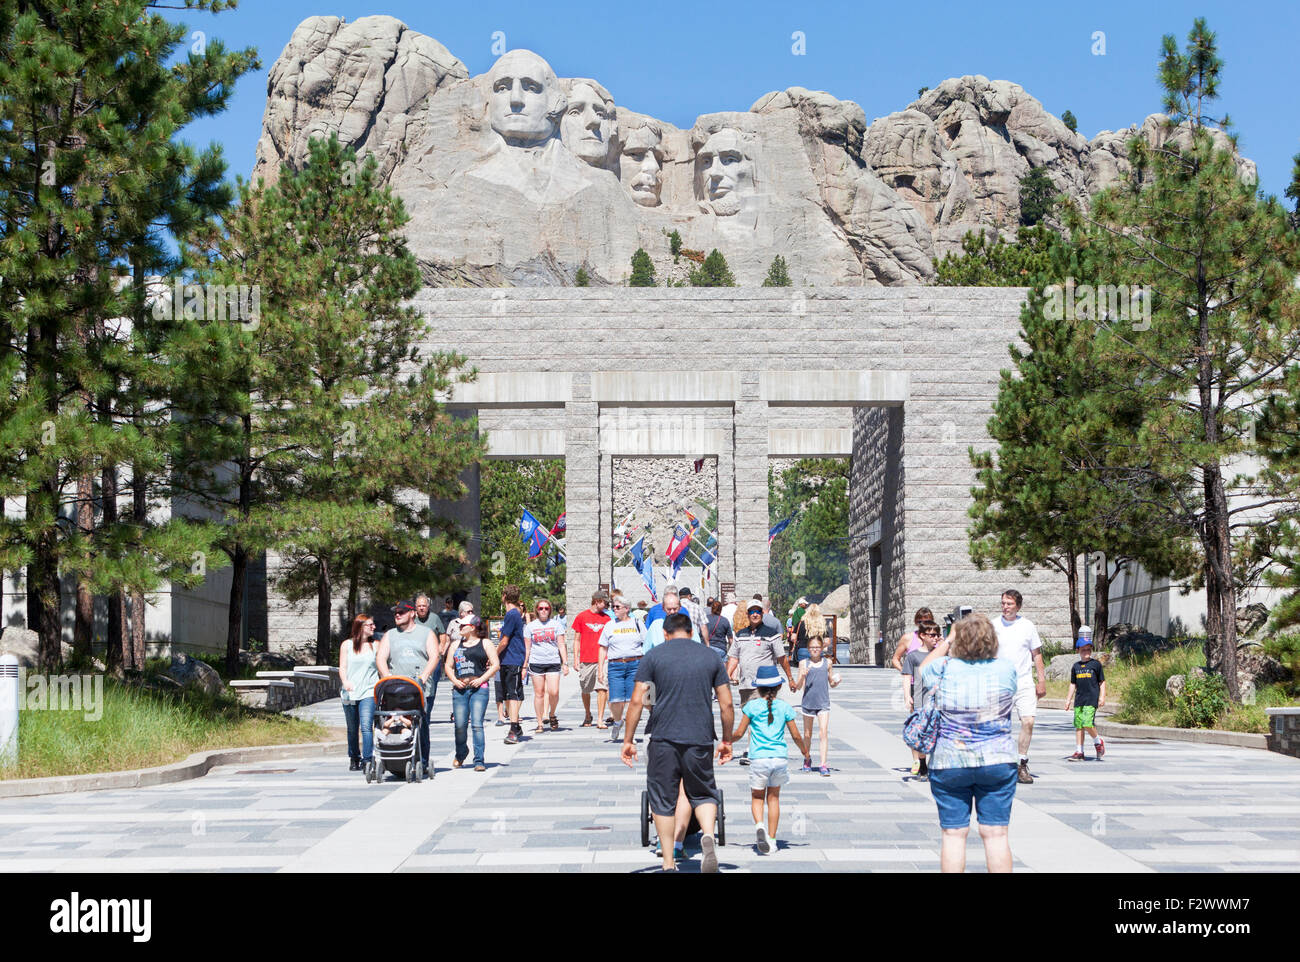 A view of visitors, tourists, families seeing the Mount Rushmore National Memorial, South Dakota. Stock Photo